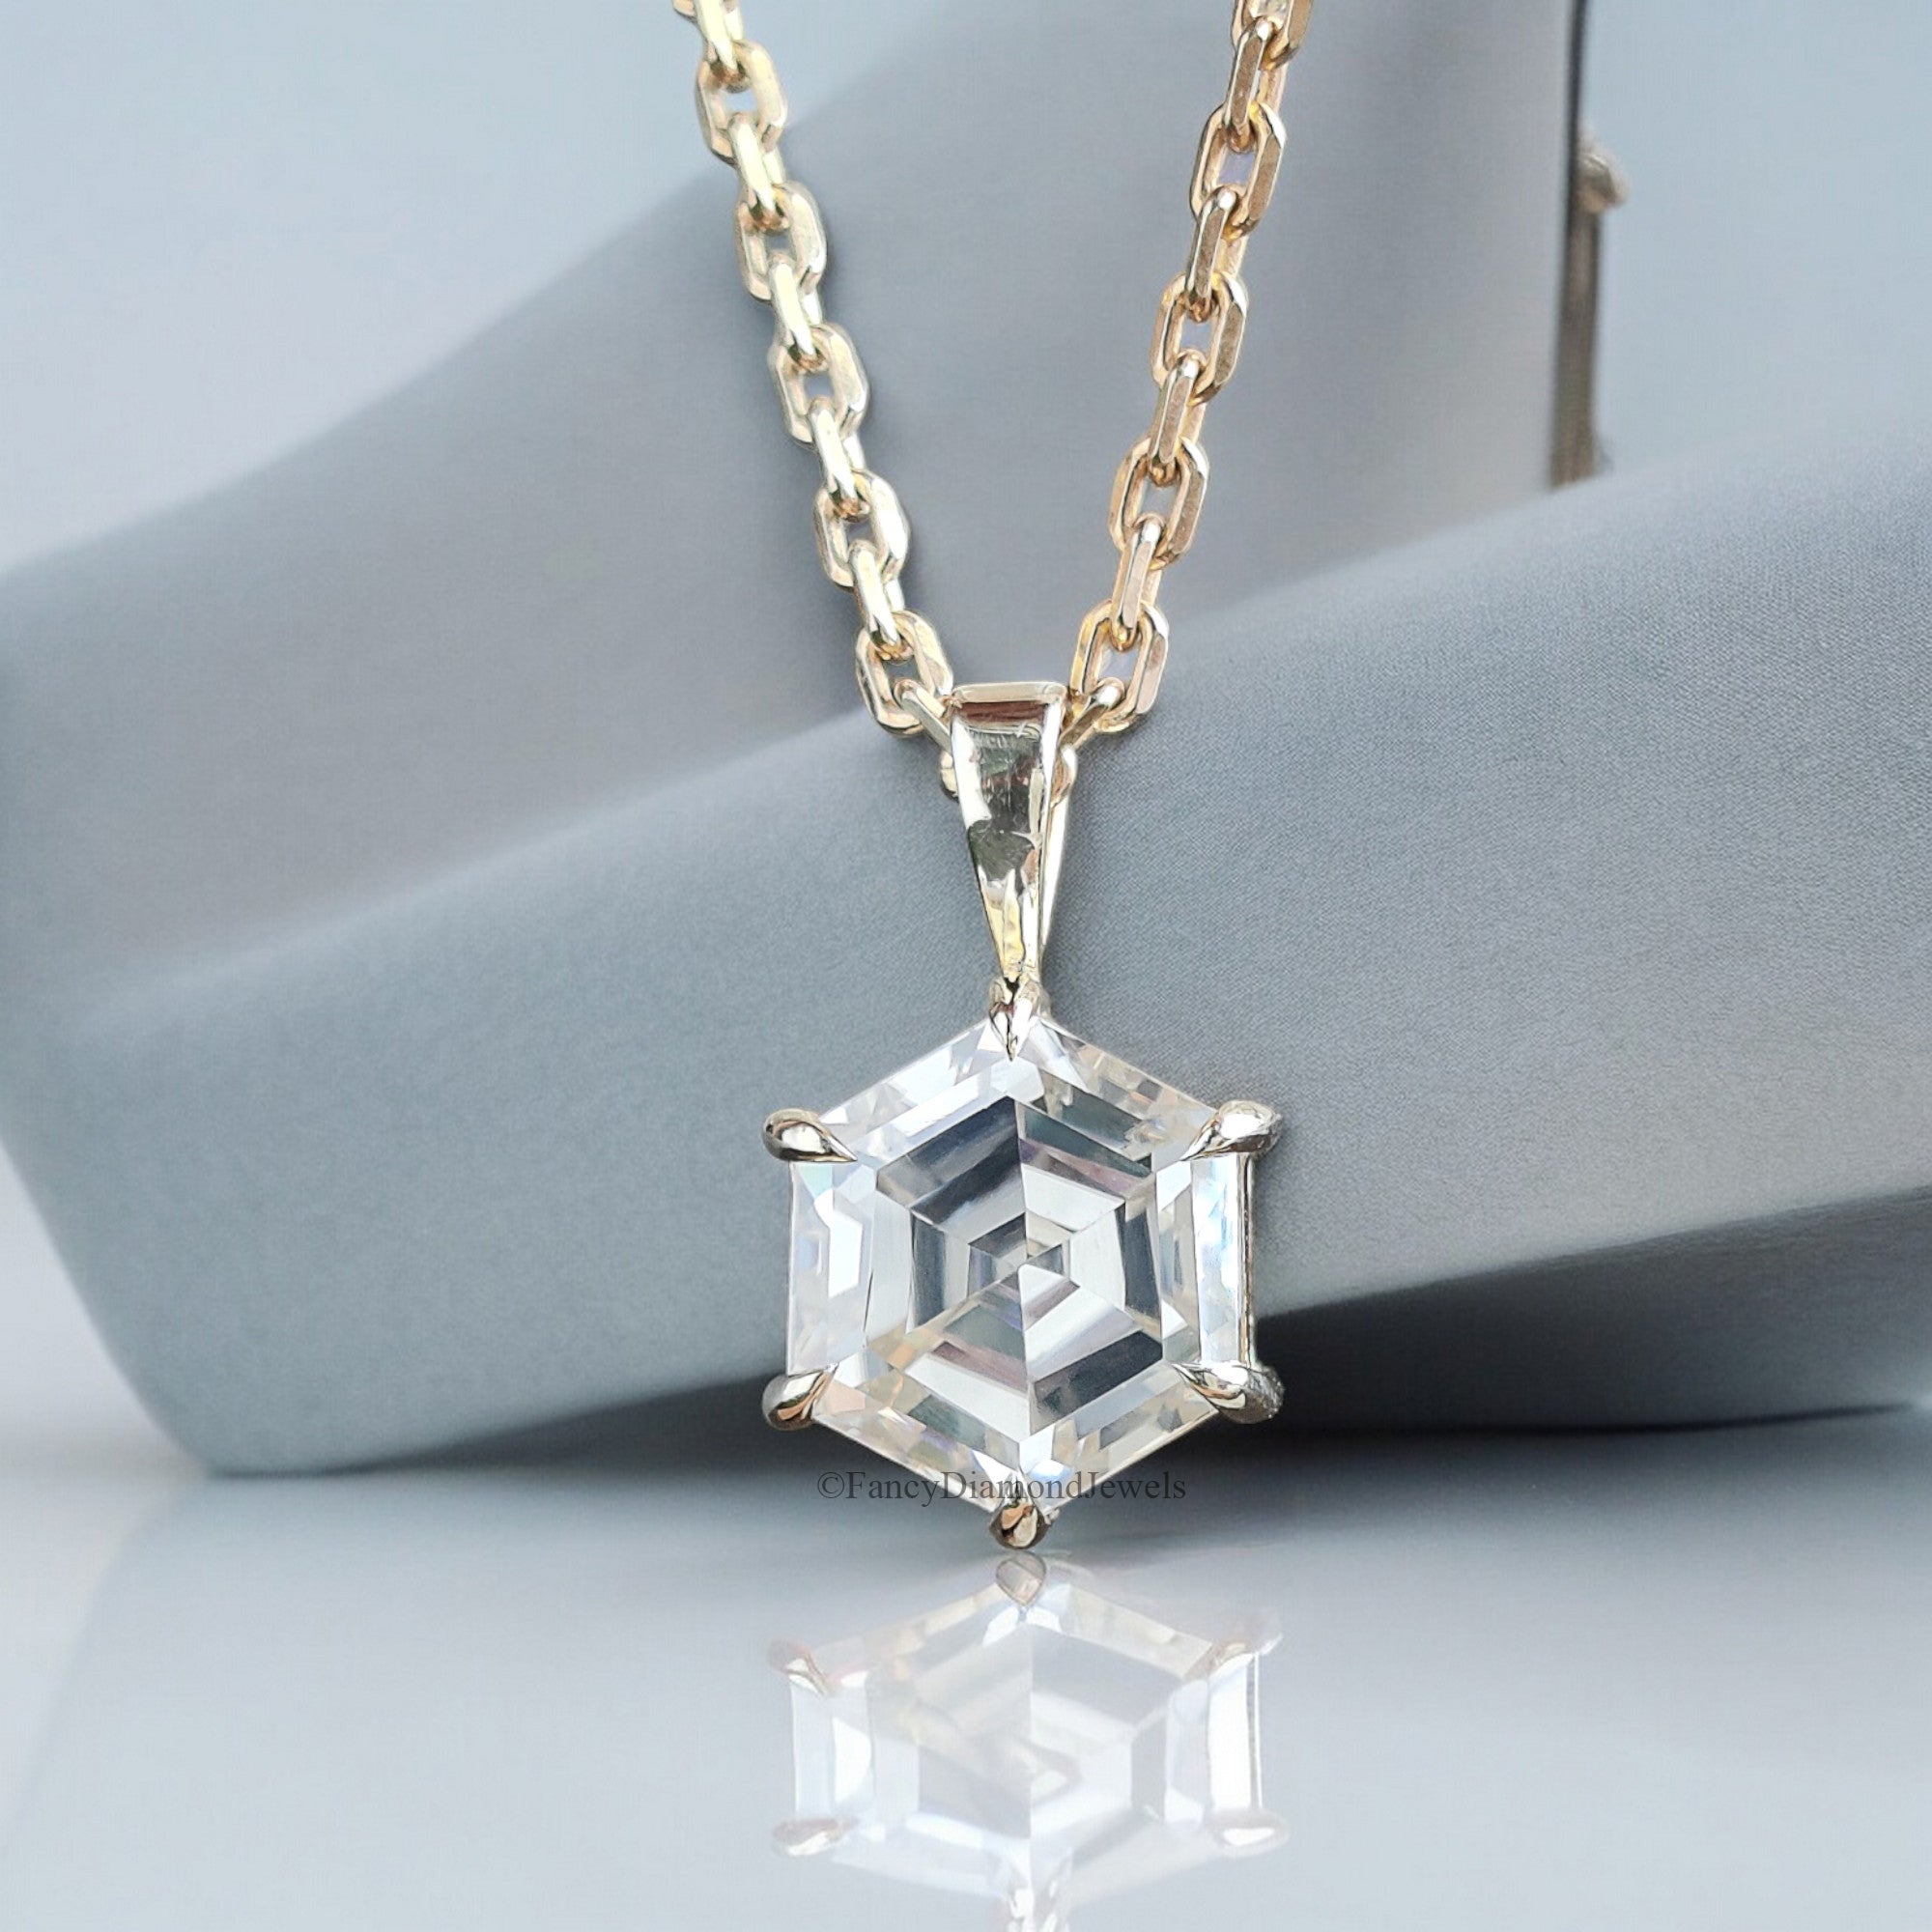 Antique Moissanite Pendant 2.55 CT Hexagon Cut Yellow Gold Handmade Jewelry Six Pointed Claw Prong Setting Pendant Solitaire Pendant FD190